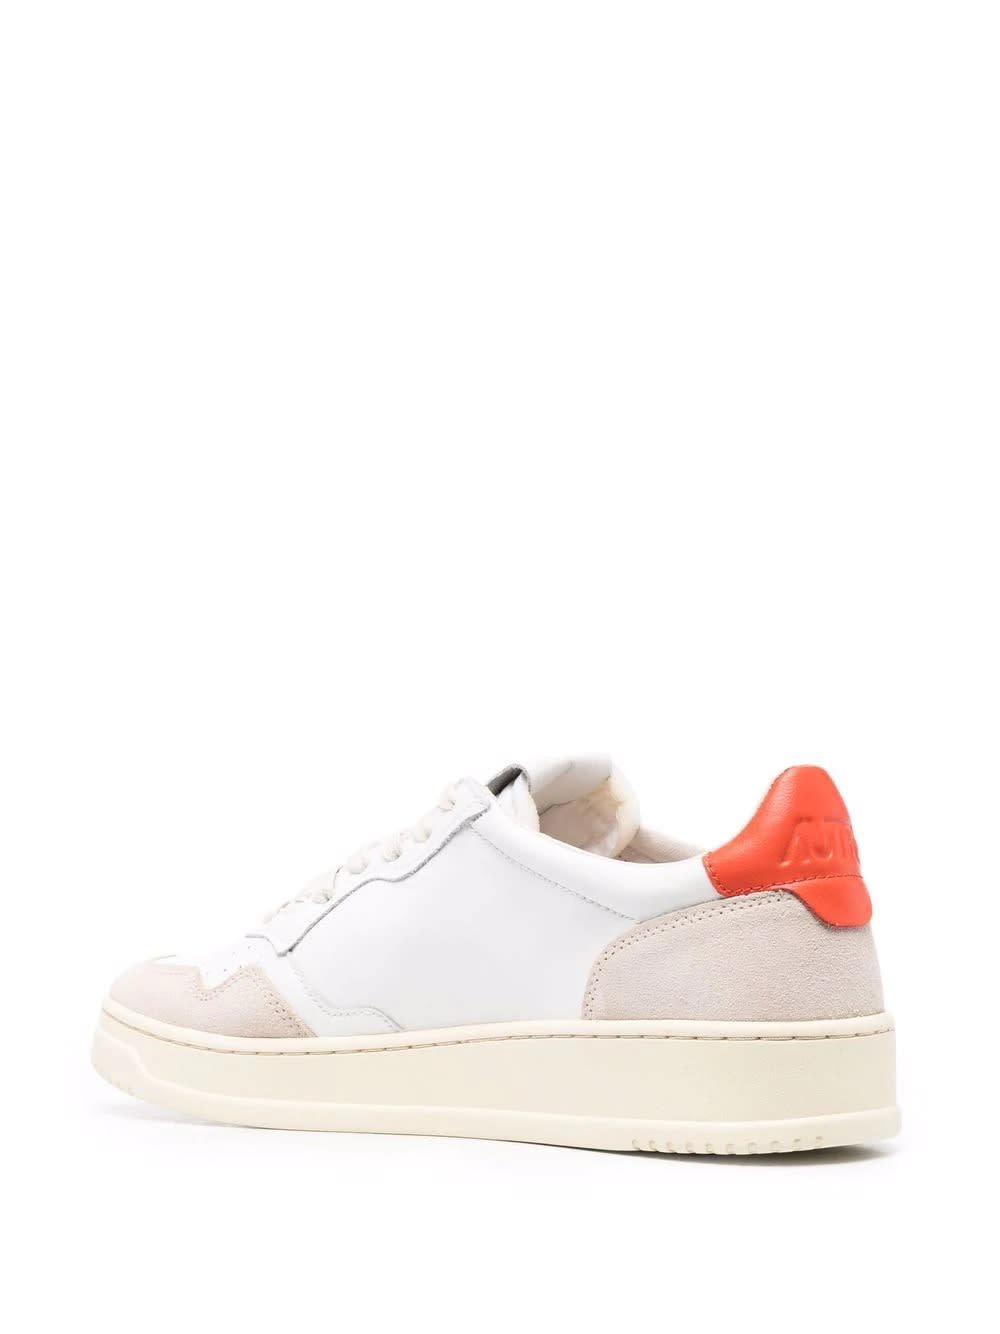 Shop Autry Medalist Low Sneakers In White And Orange Suede And Leather